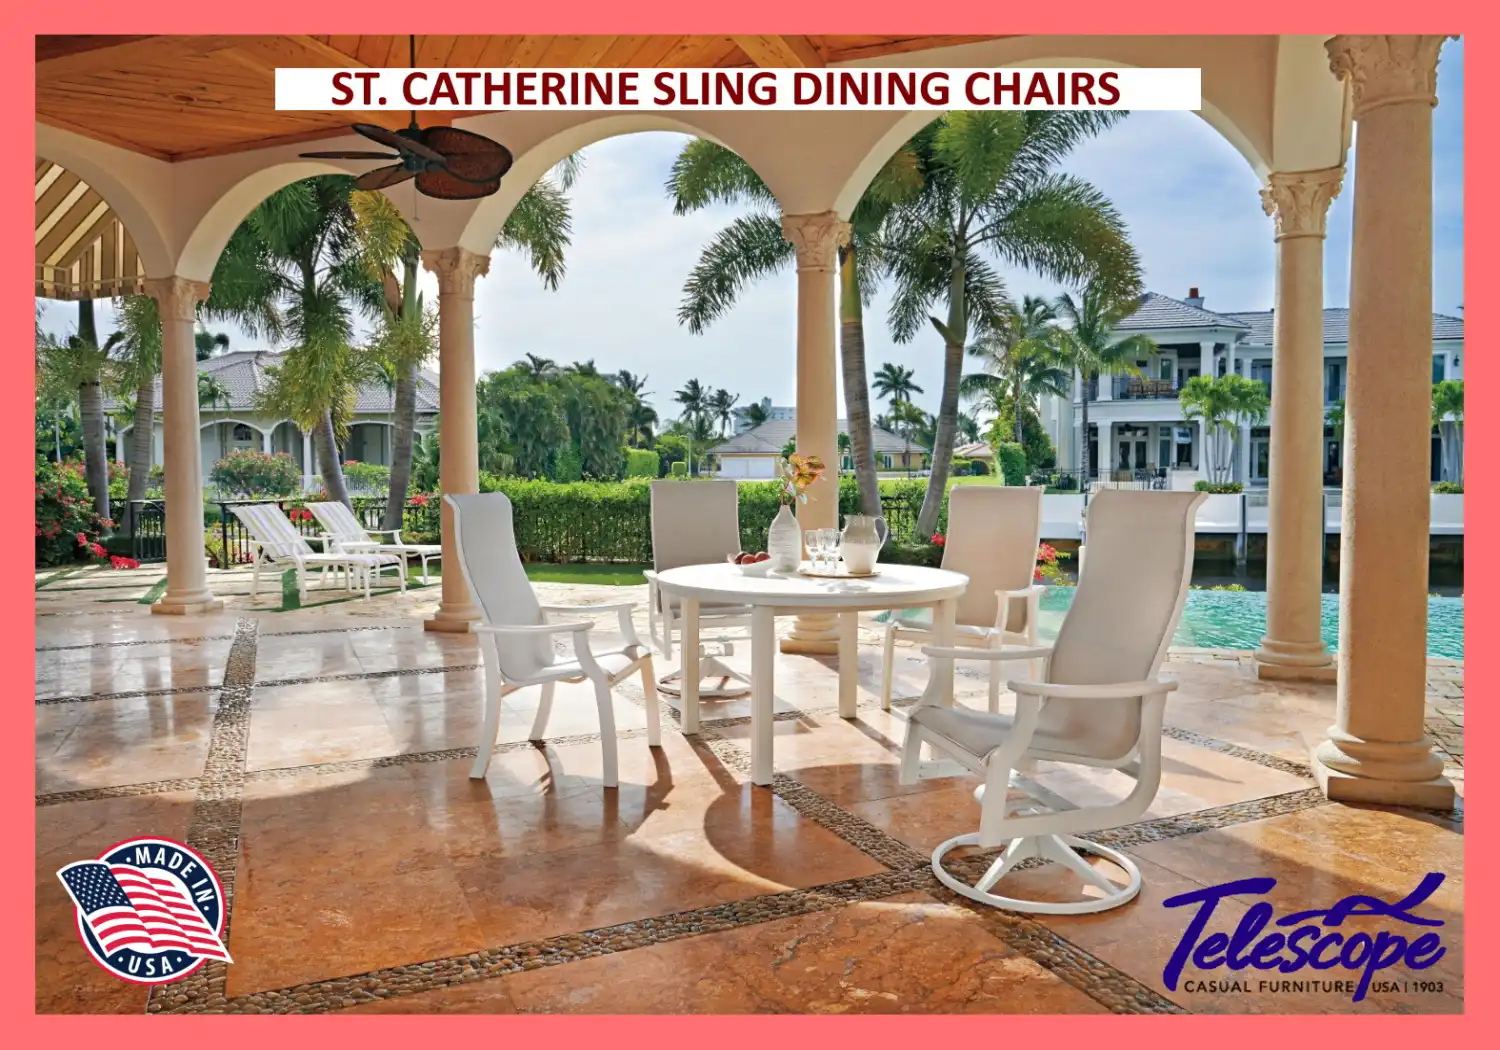 ST. CATHERINE SLING DINING CHAIRS